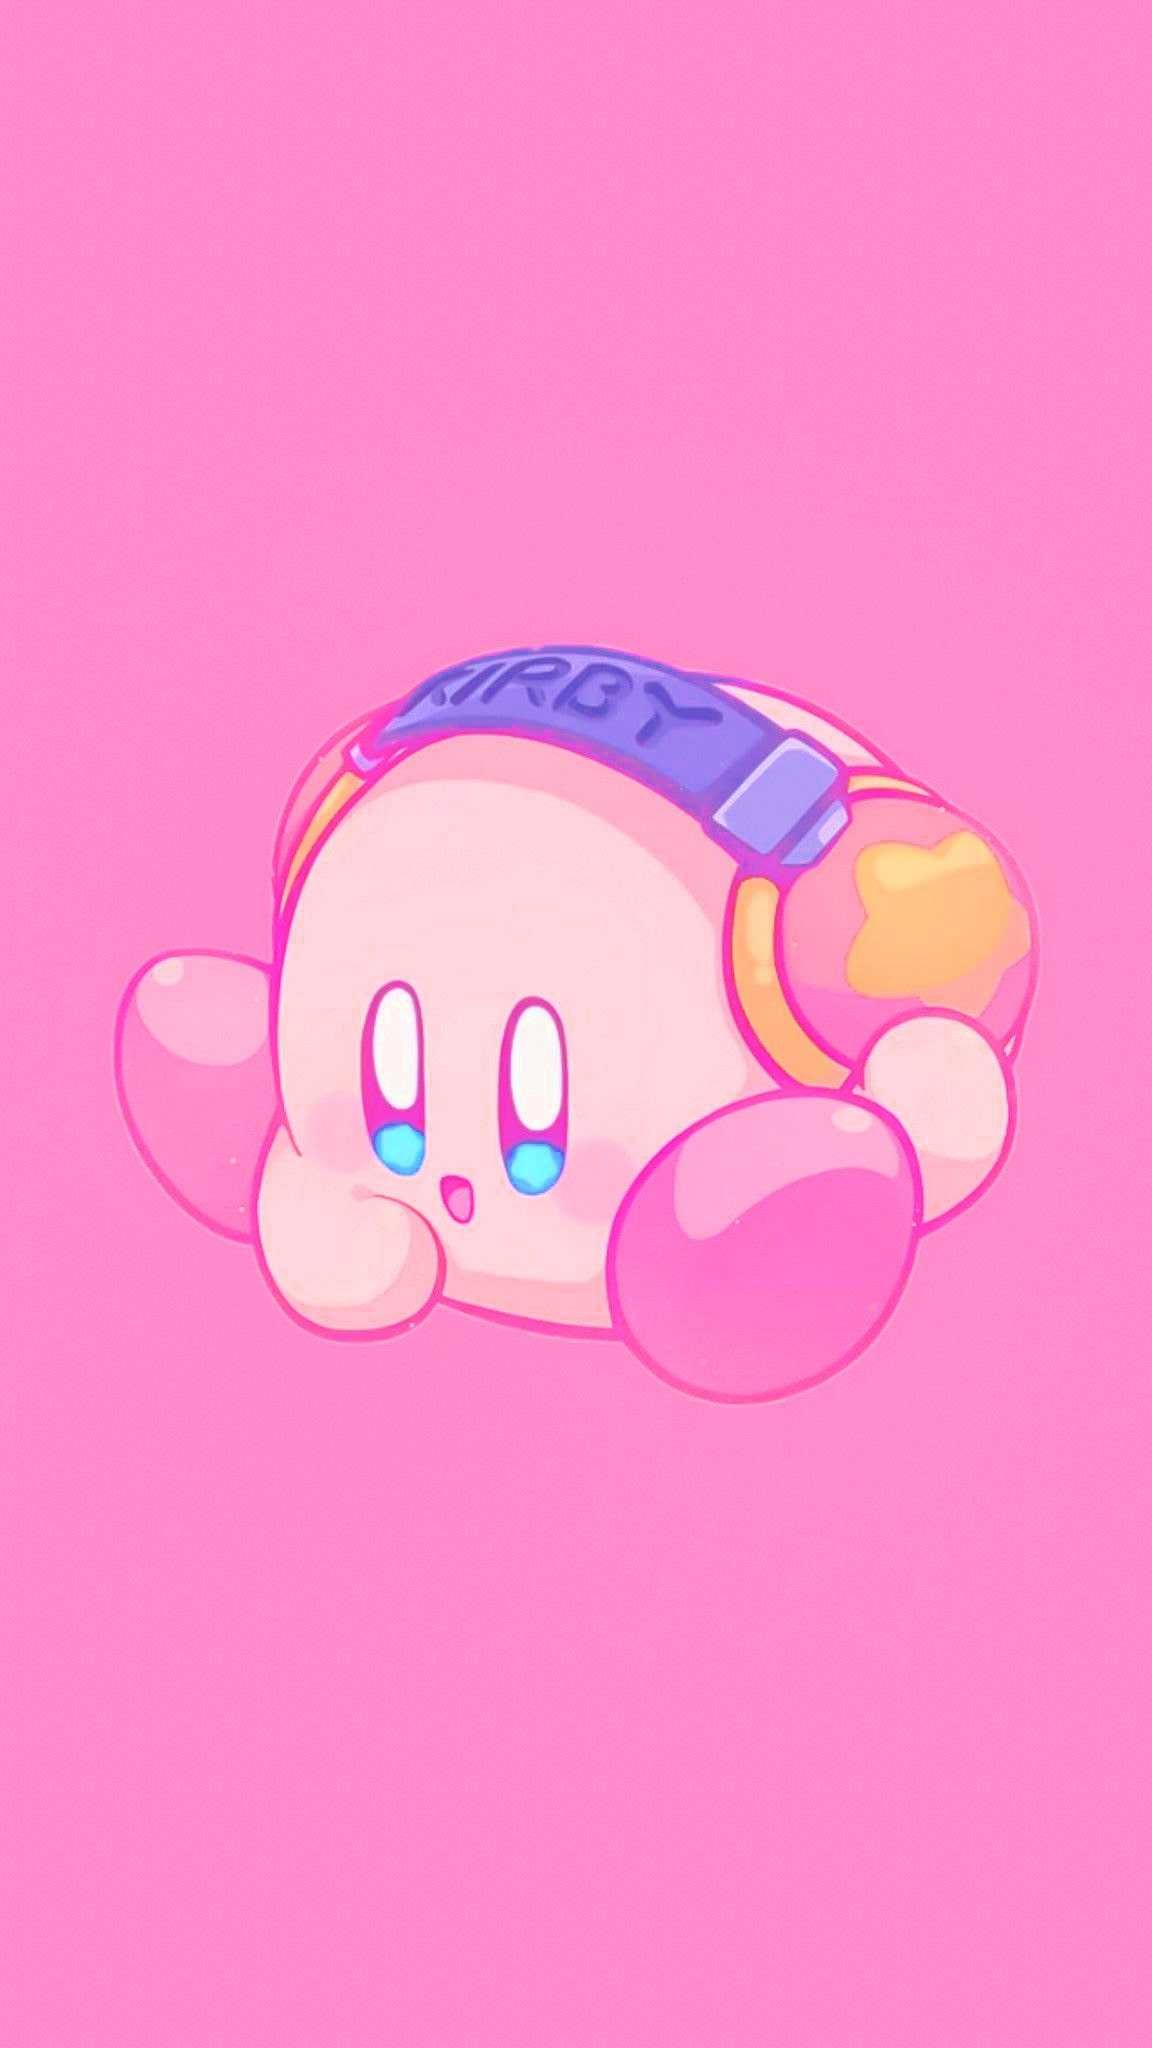 KIRBY WALLPAPER IN PINKKKKKKKKKKKKKKKKKKKKKKKKKKKK | Userstyles.org